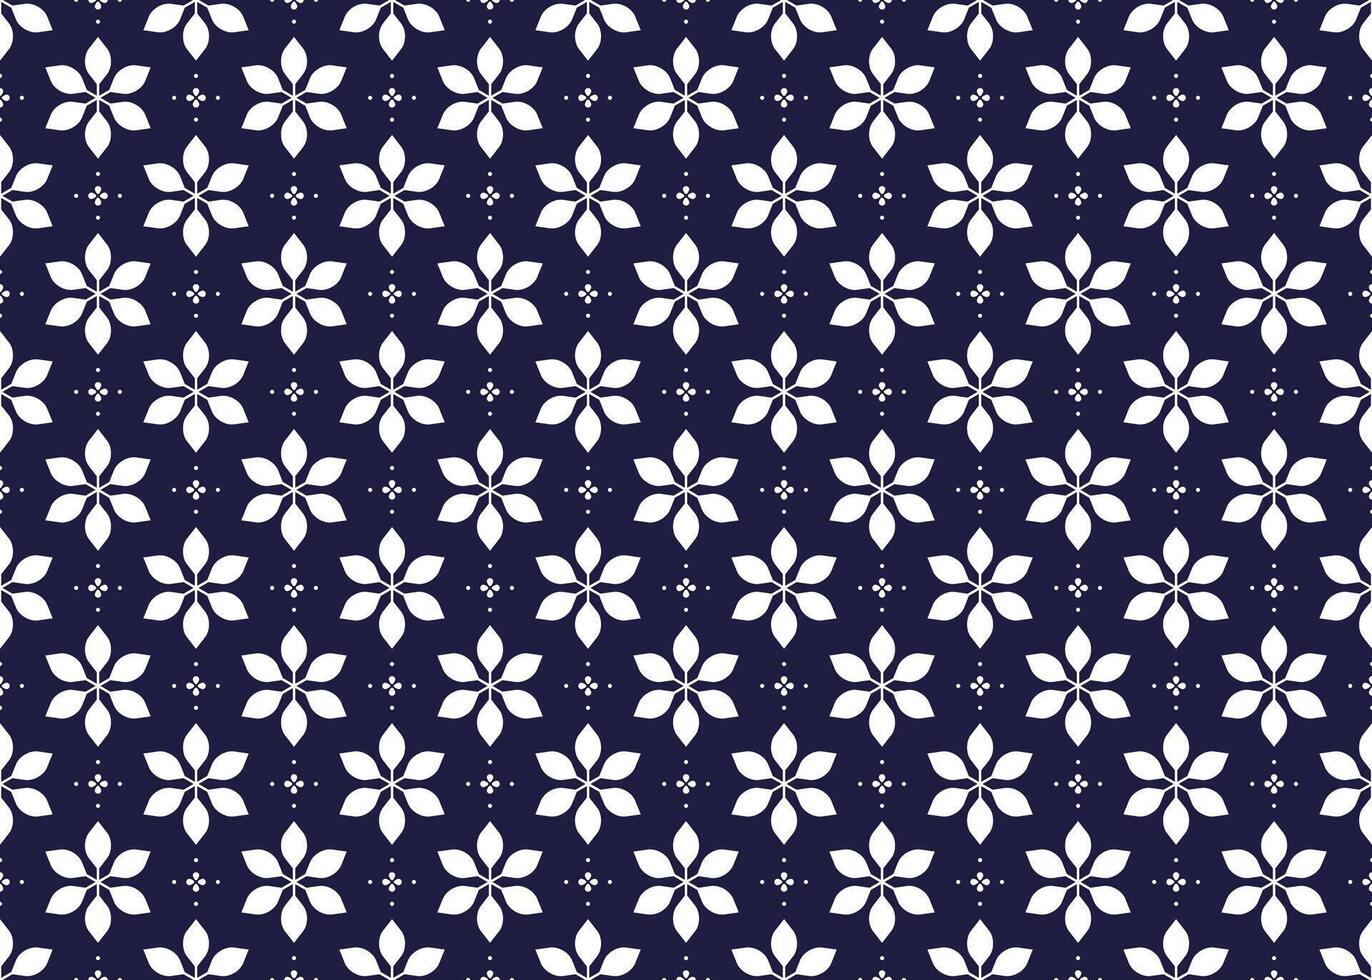 Symbol geometric white flowers on dark blue background seamless pattern for cloth carpet wallpaper wrapping etc. vector